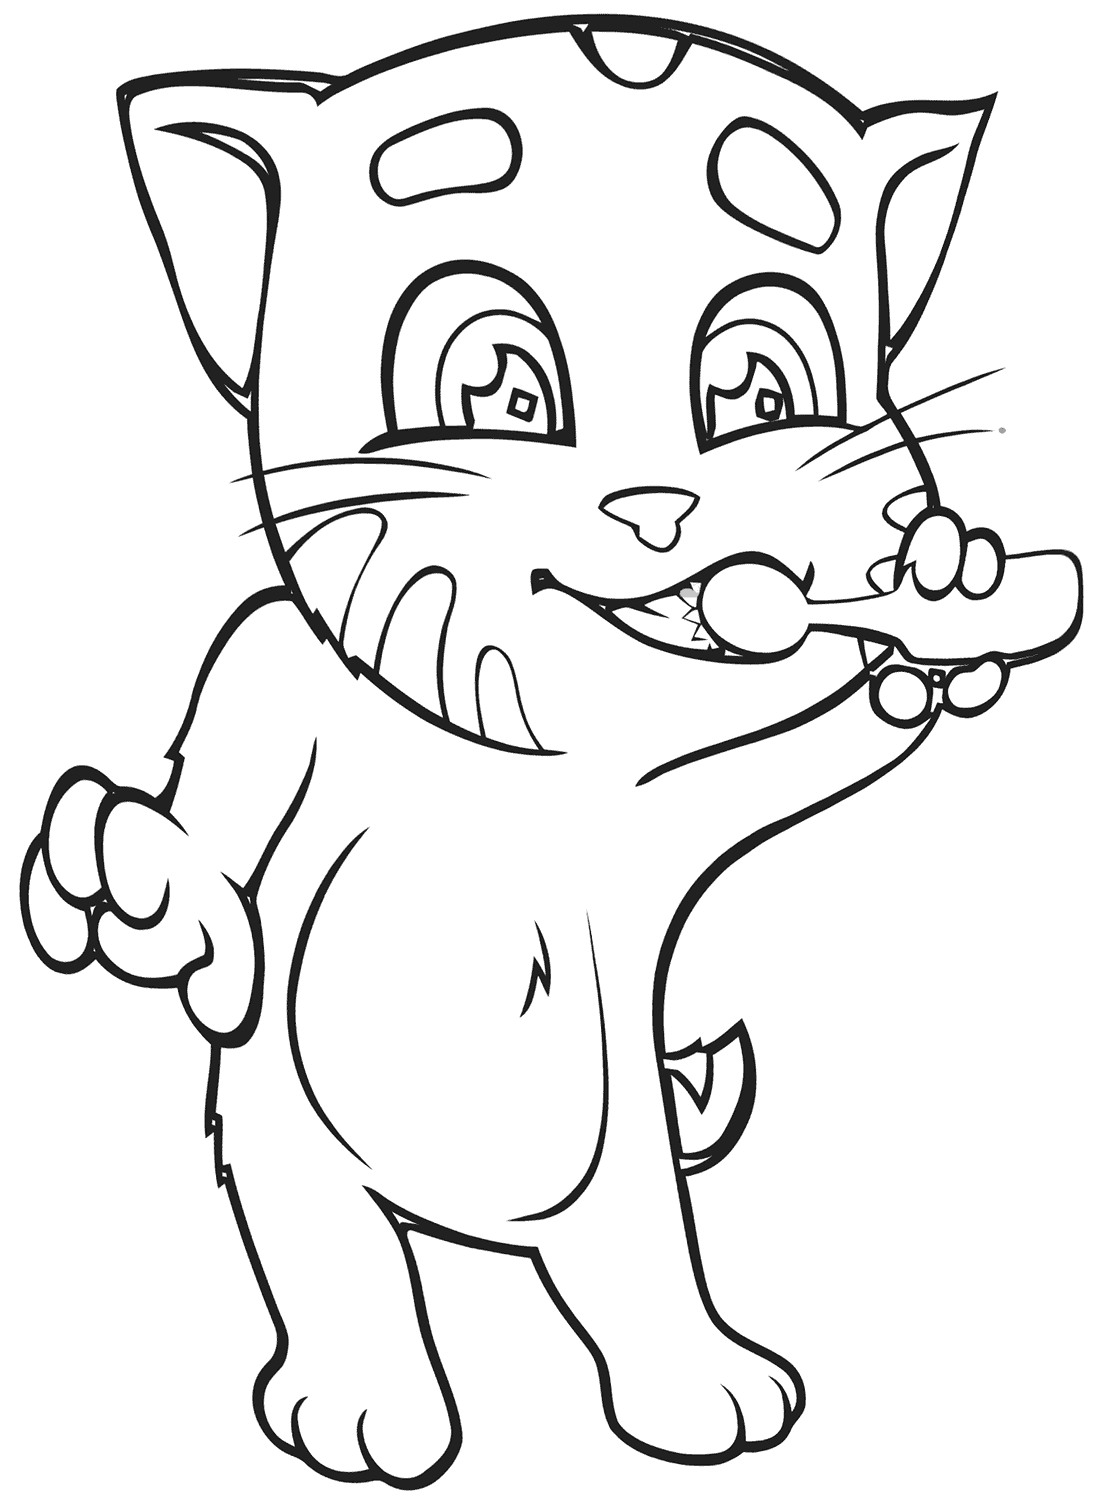 Talking Tom And Friends Coloring Pages | Coloring Pages To